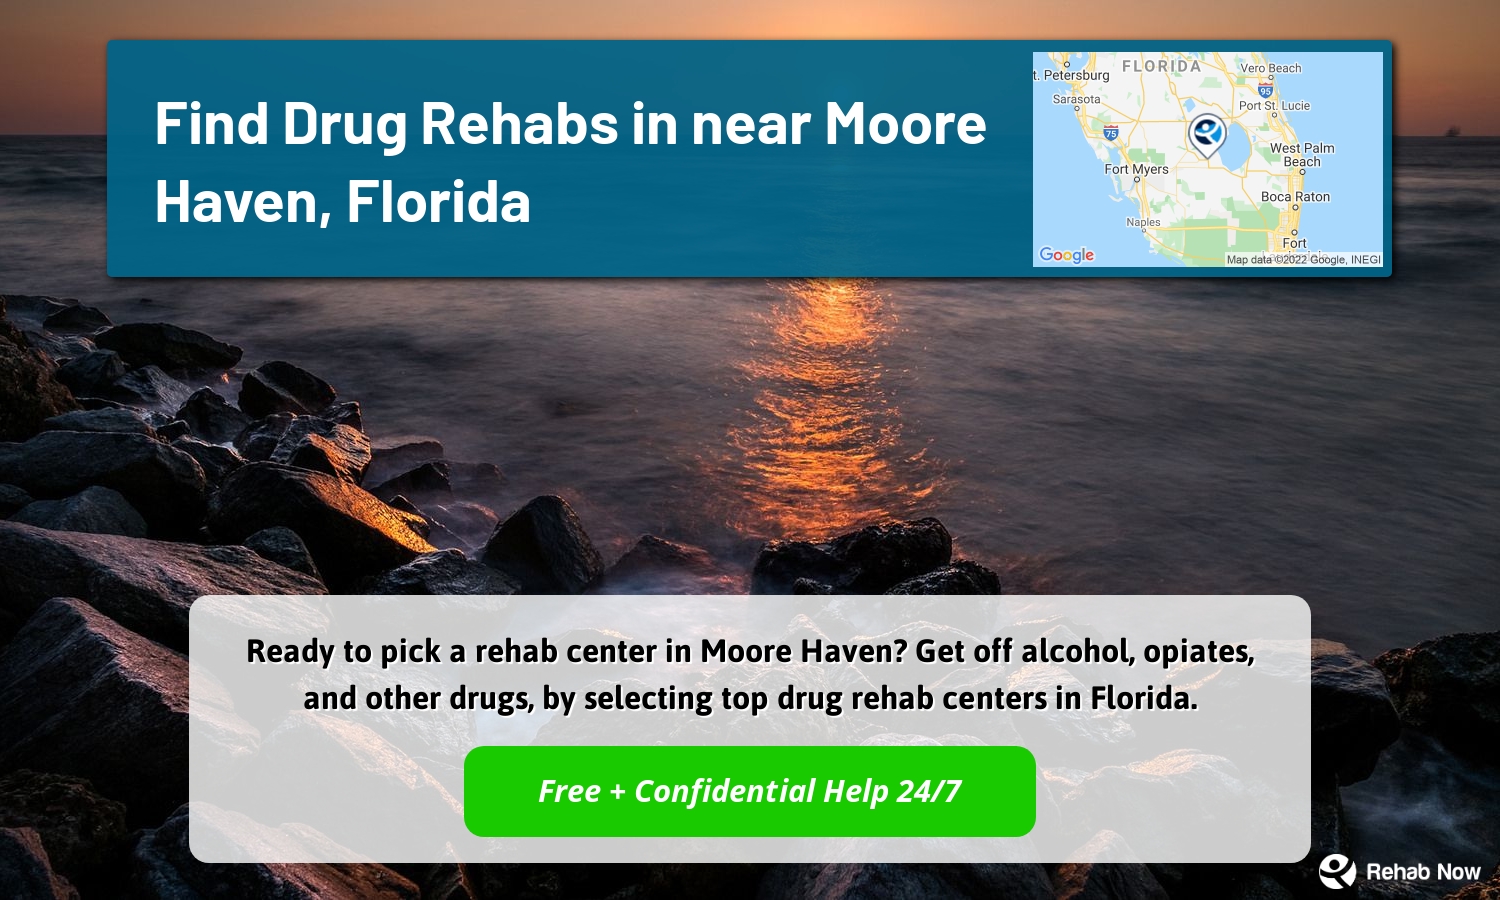 Ready to pick a rehab center in Moore Haven? Get off alcohol, opiates, and other drugs, by selecting top drug rehab centers in Florida.